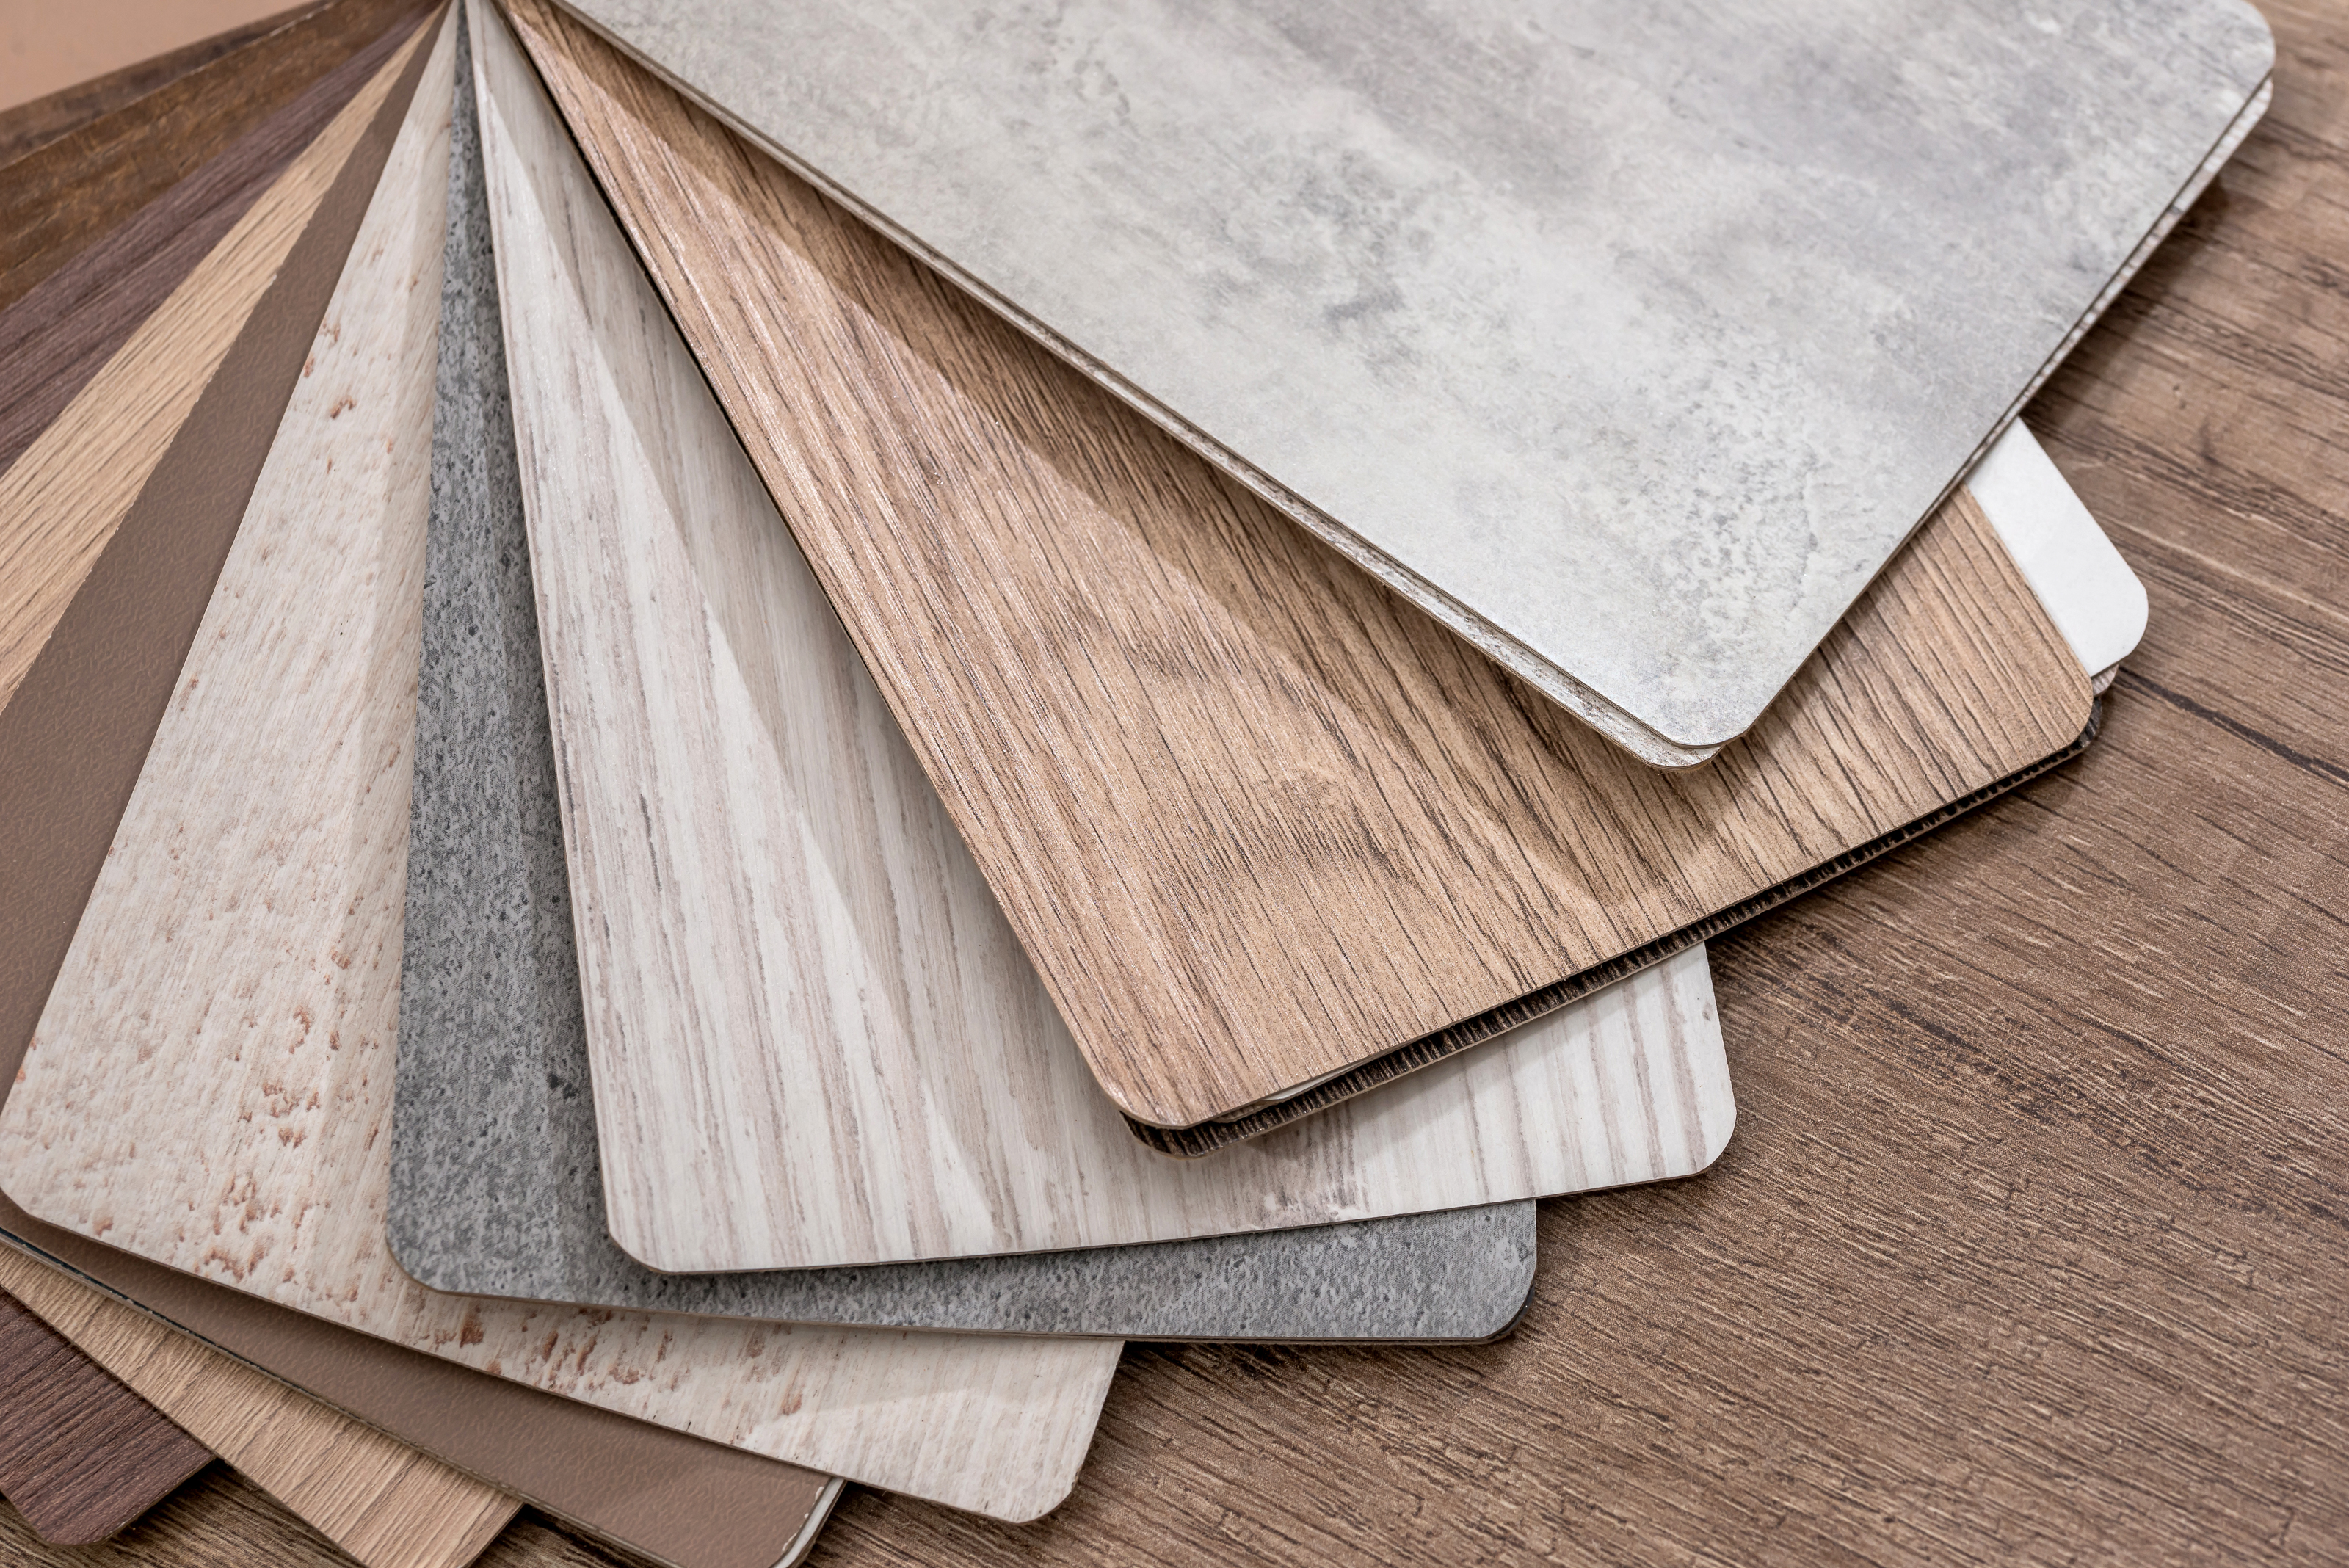 Types of Laminate Flooring and How to Choose